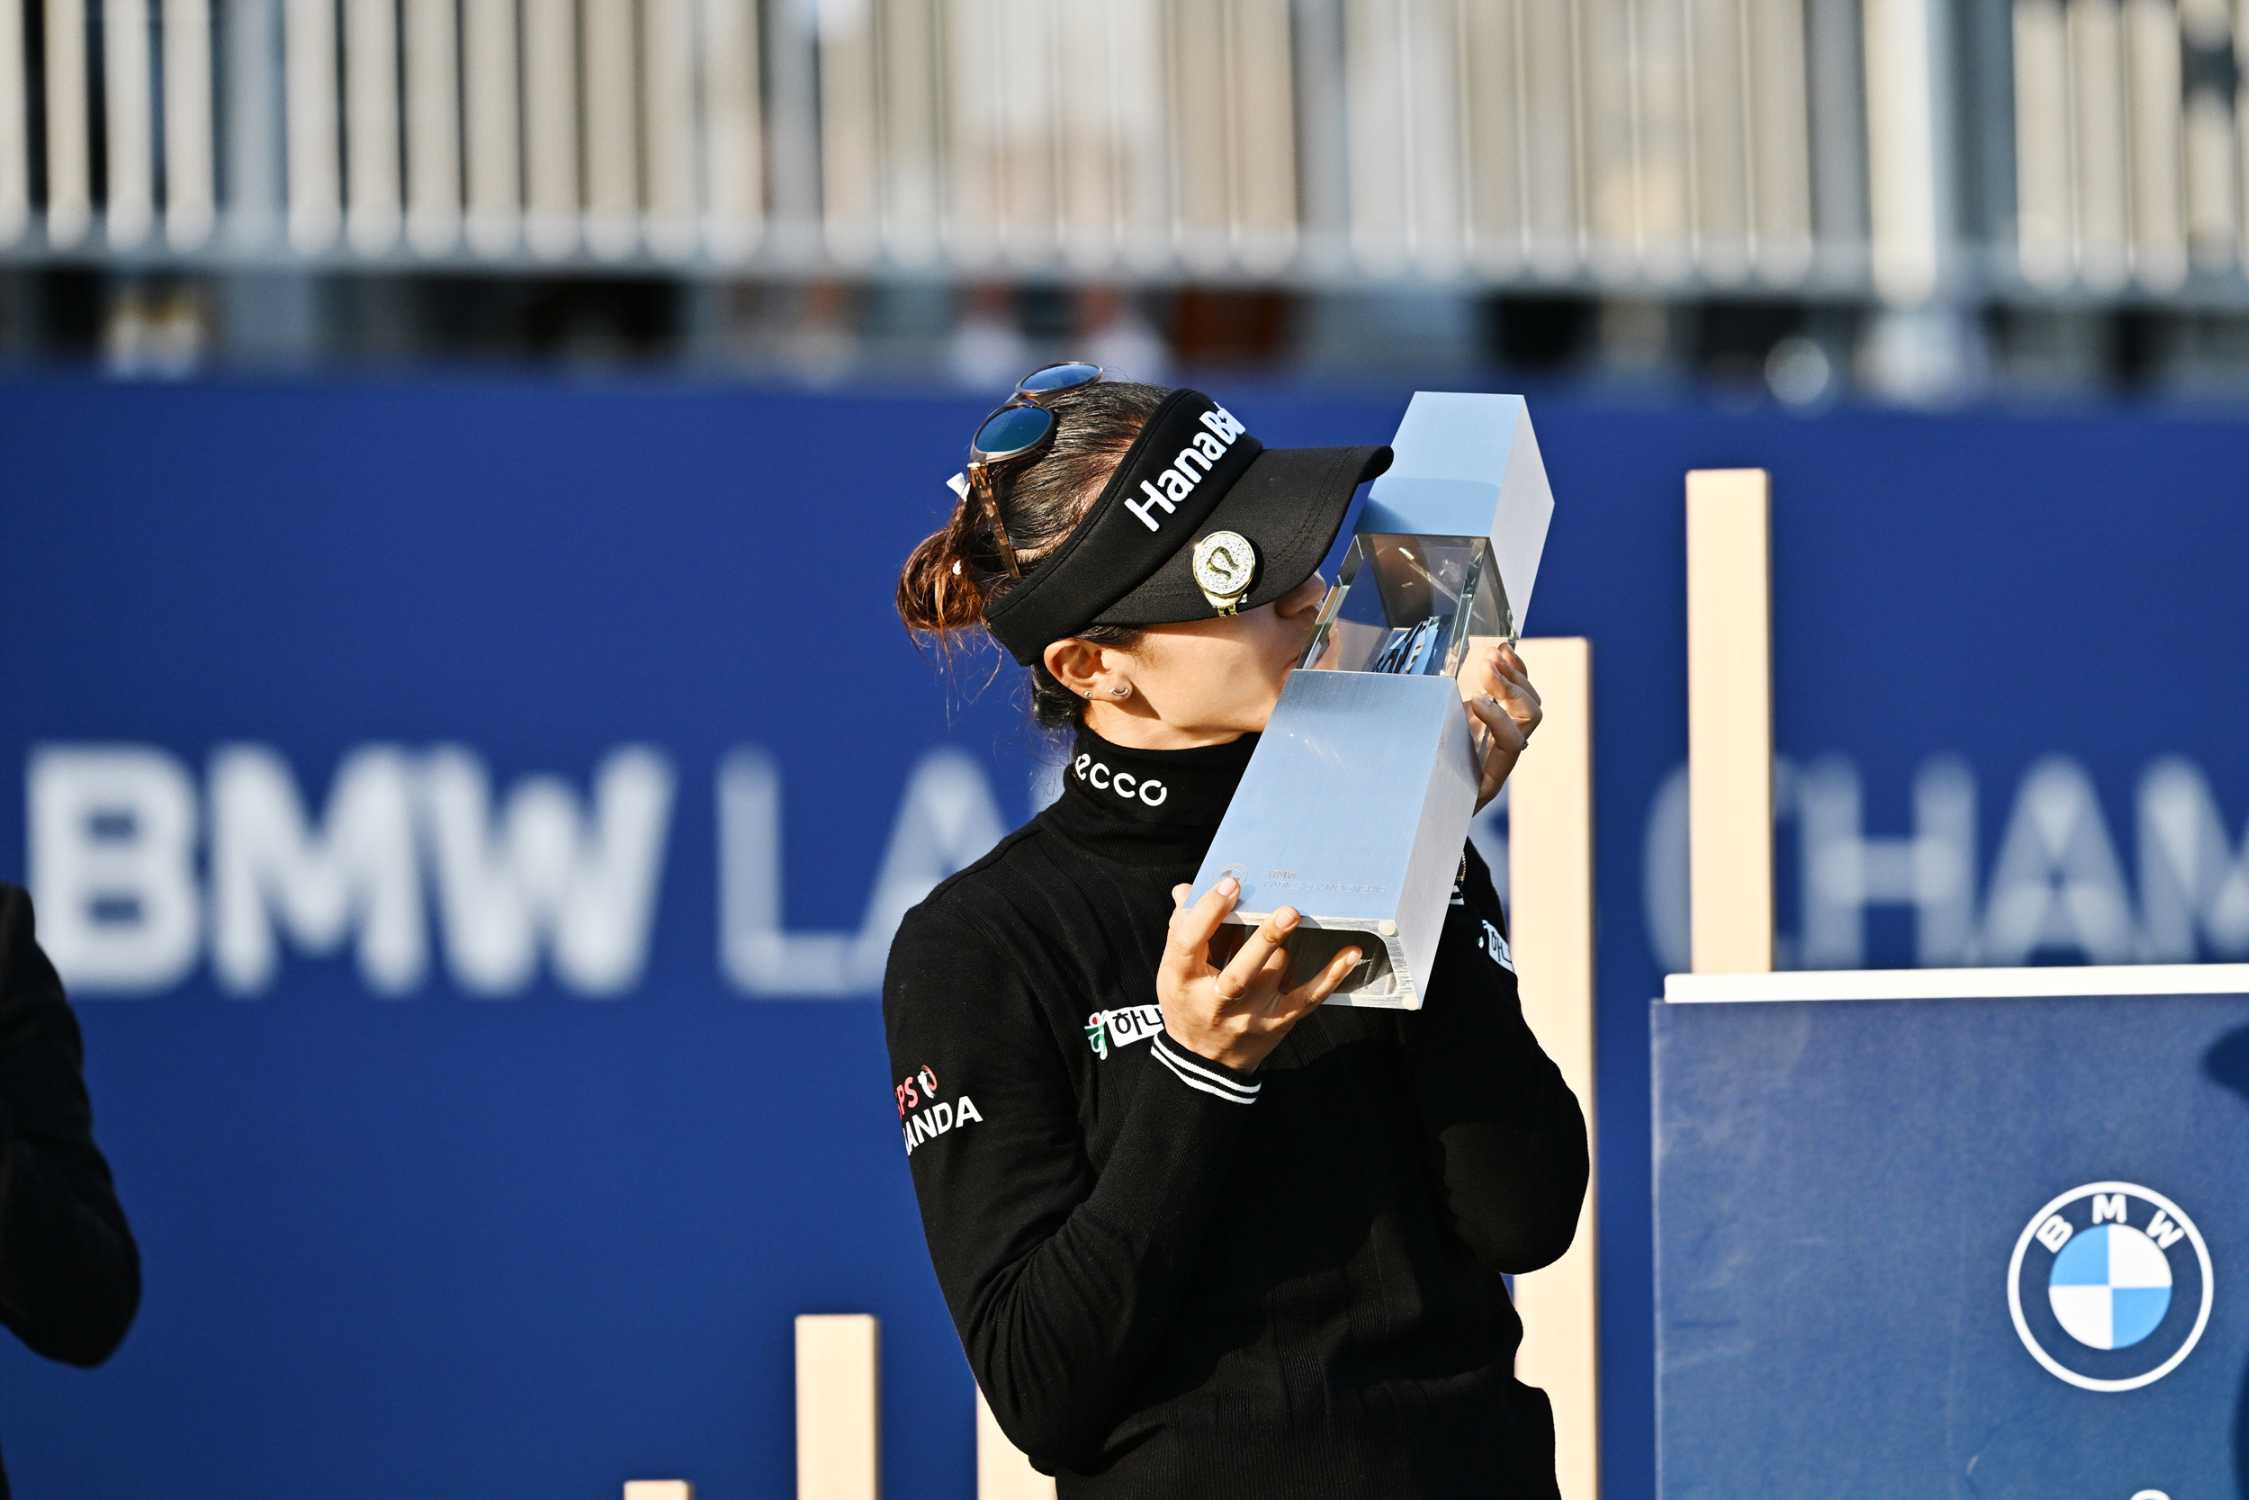 Lydia Ko wins the BMW Ladies Championship 2022 in South Korea, in front